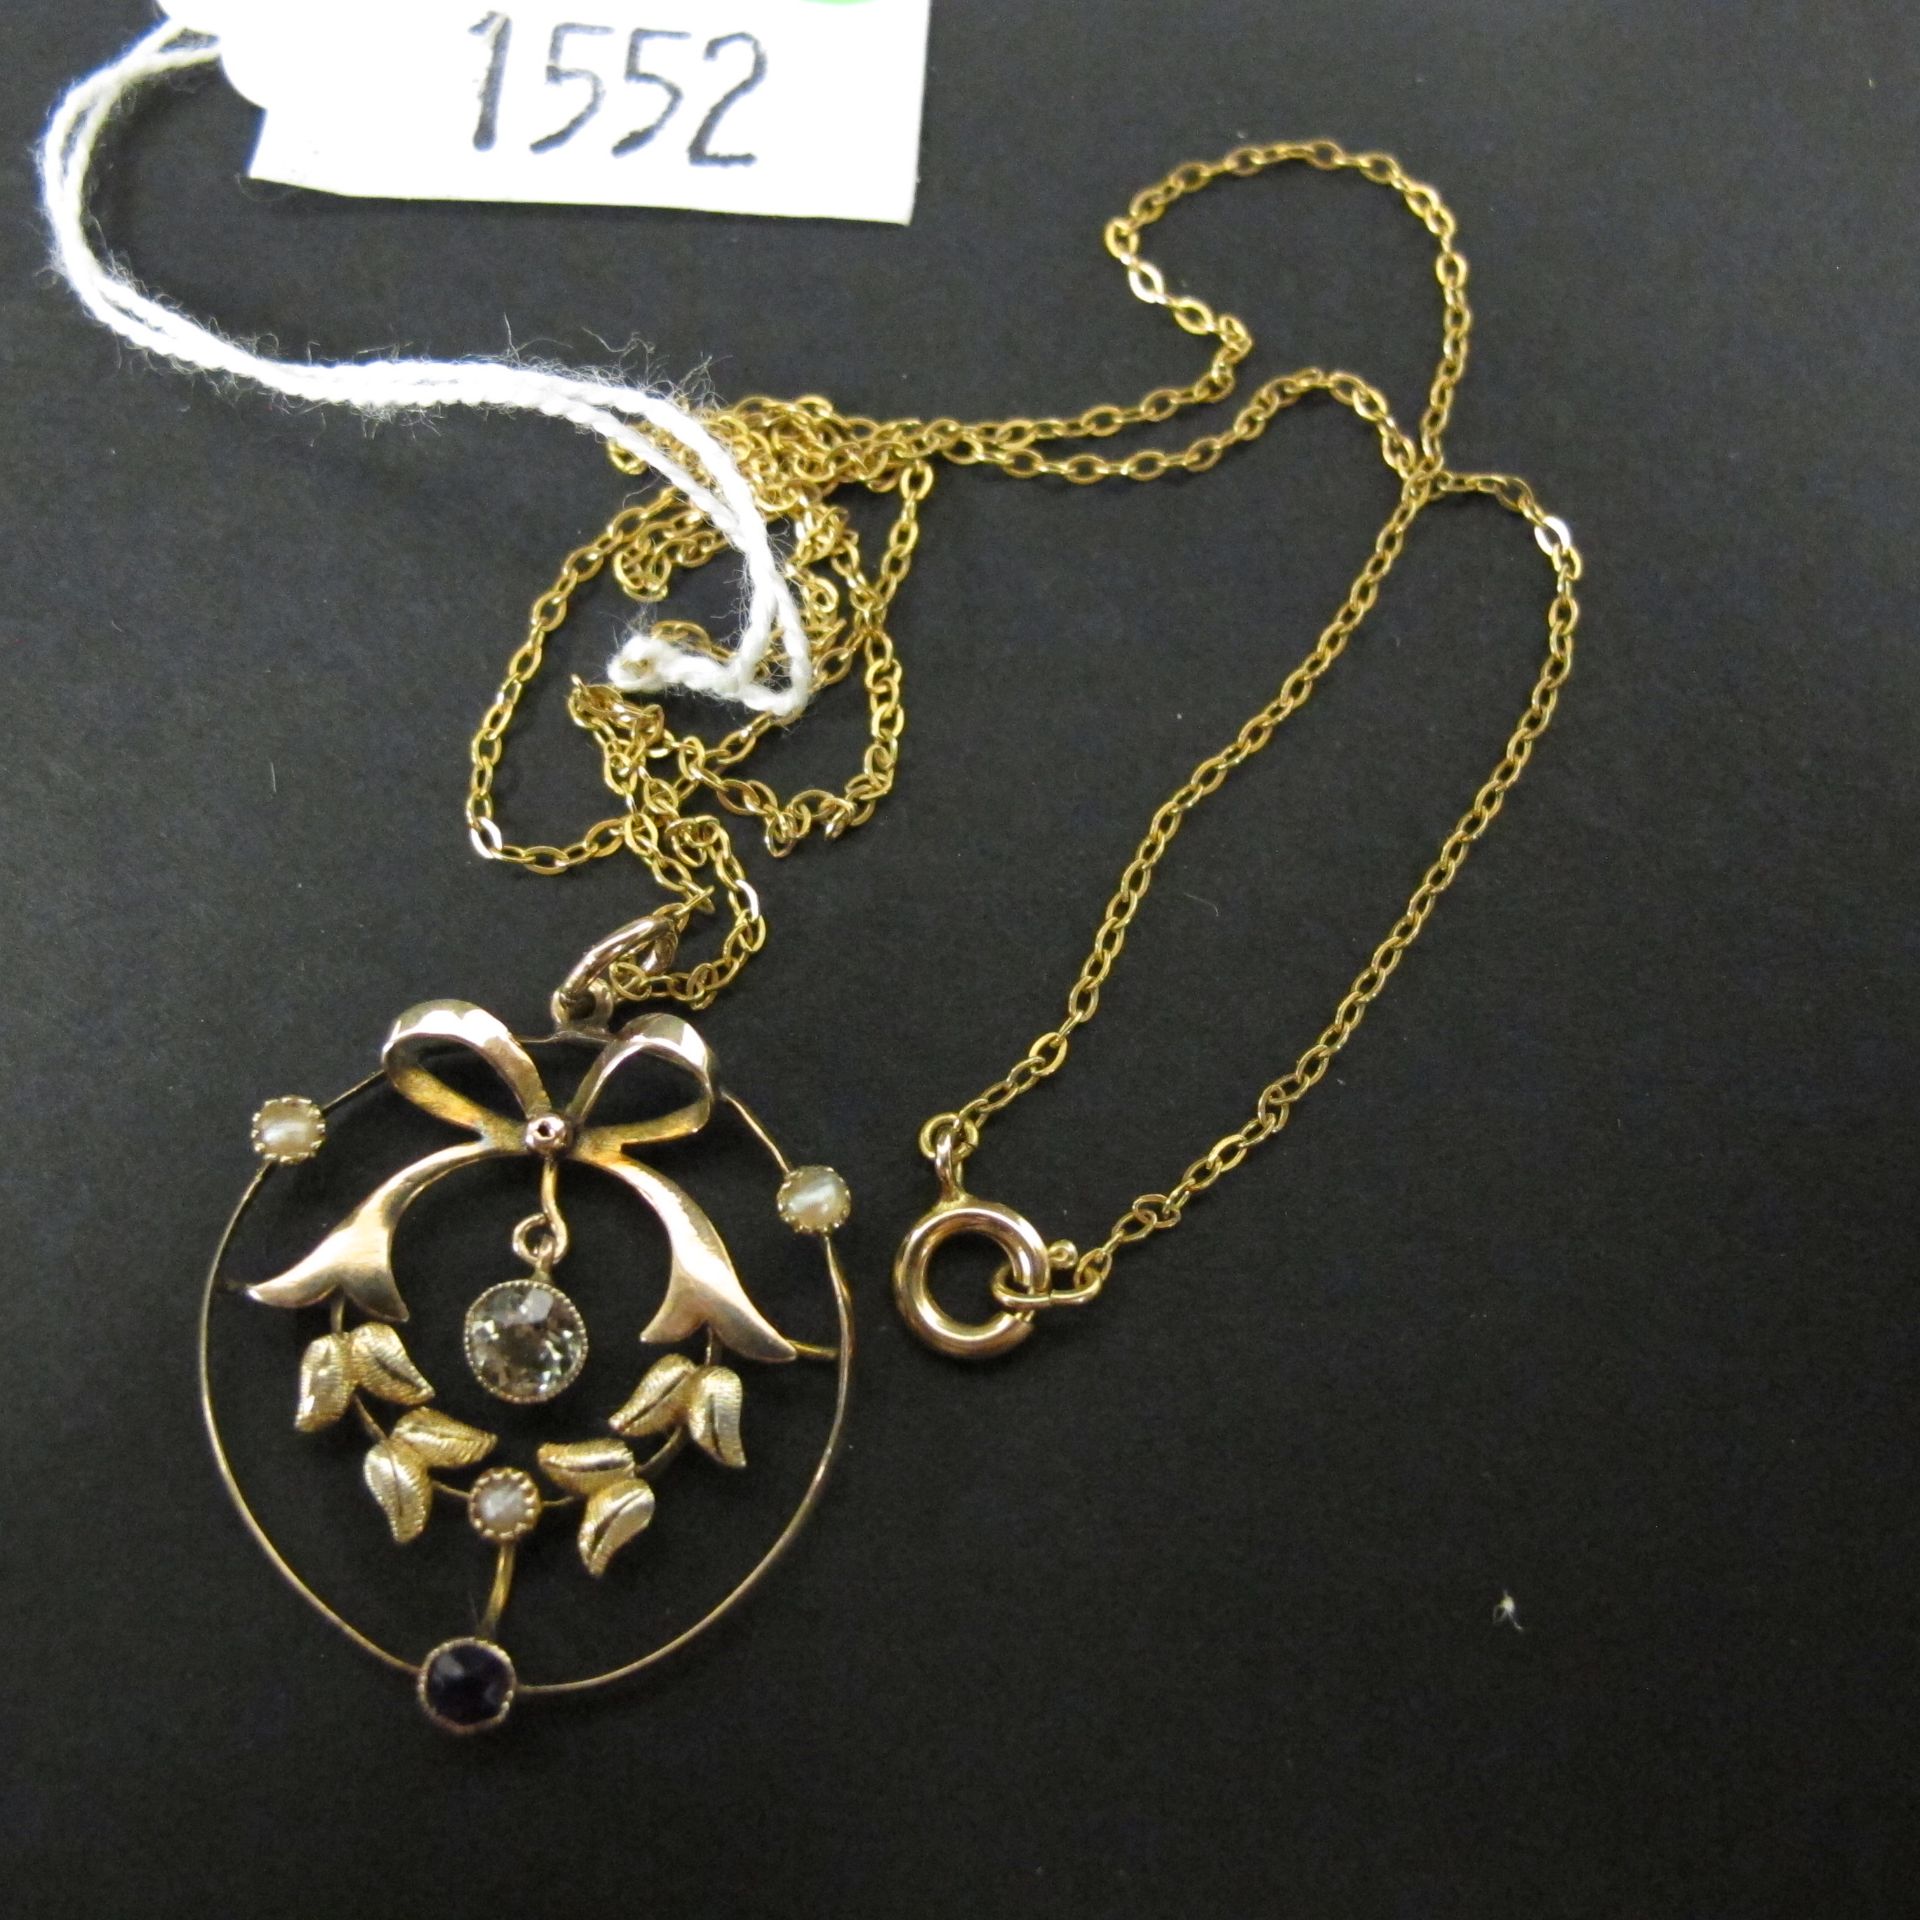 Antique 9ct gold pendant and chain in Suffragette colours (peridot, pearl and amethyst) (est £100-£